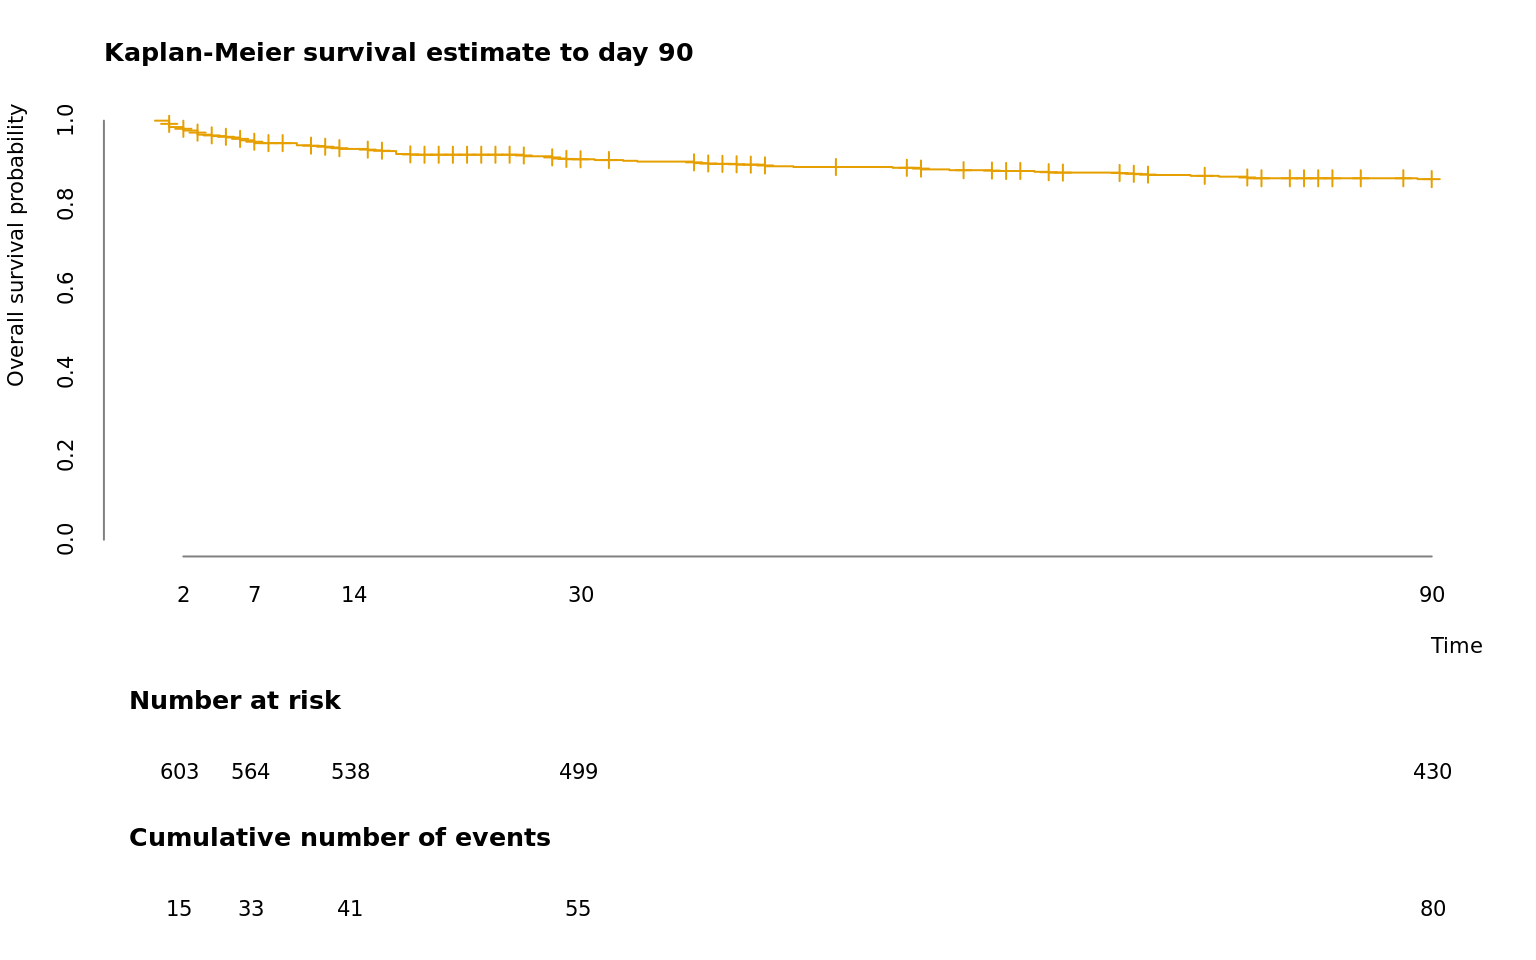 Survival plot. Kaplan-Meier survival estimate for the first 90 days of the analyzed population.